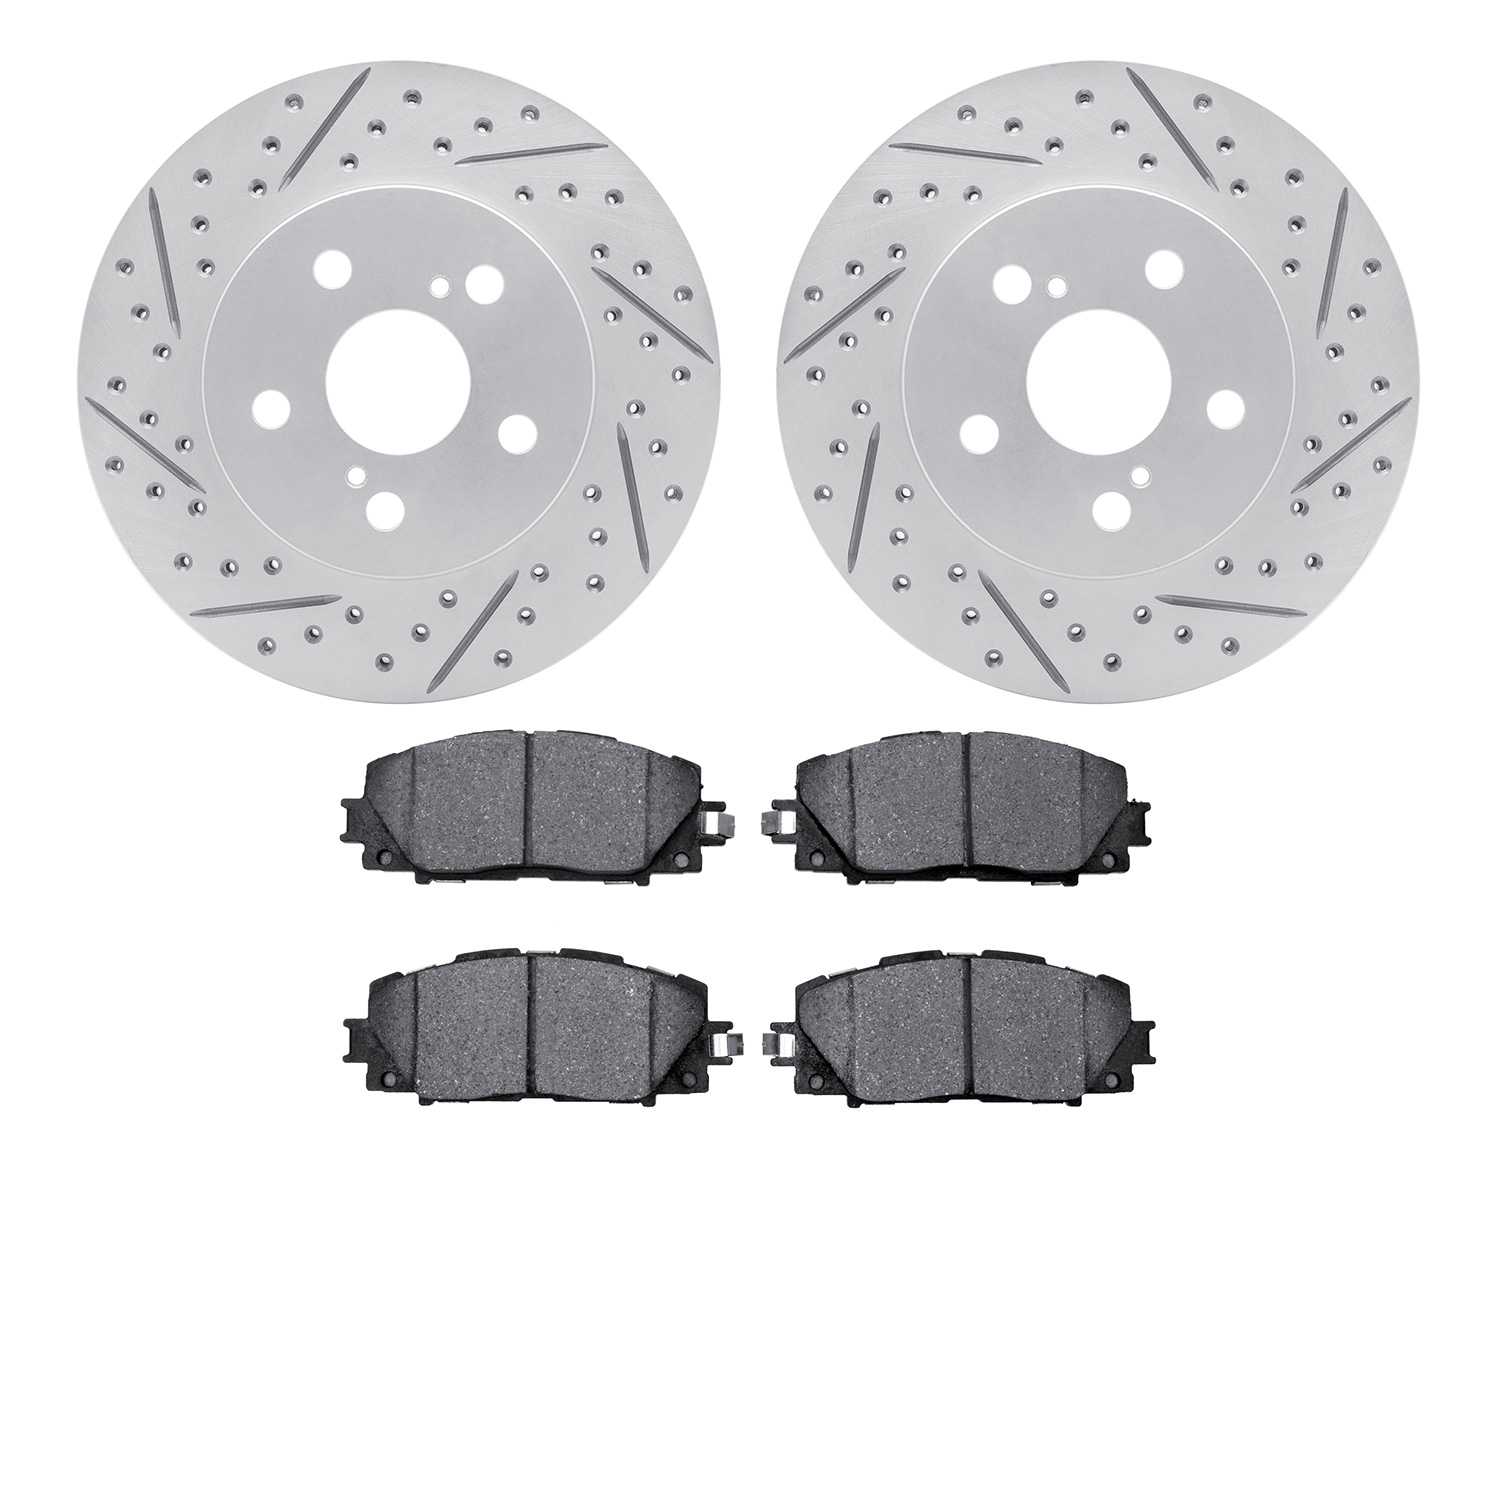 2502-76055 Geoperformance Drilled/Slotted Rotors w/5000 Advanced Brake Pads Kit, Fits Select Lexus/Toyota/Scion, Position: Front